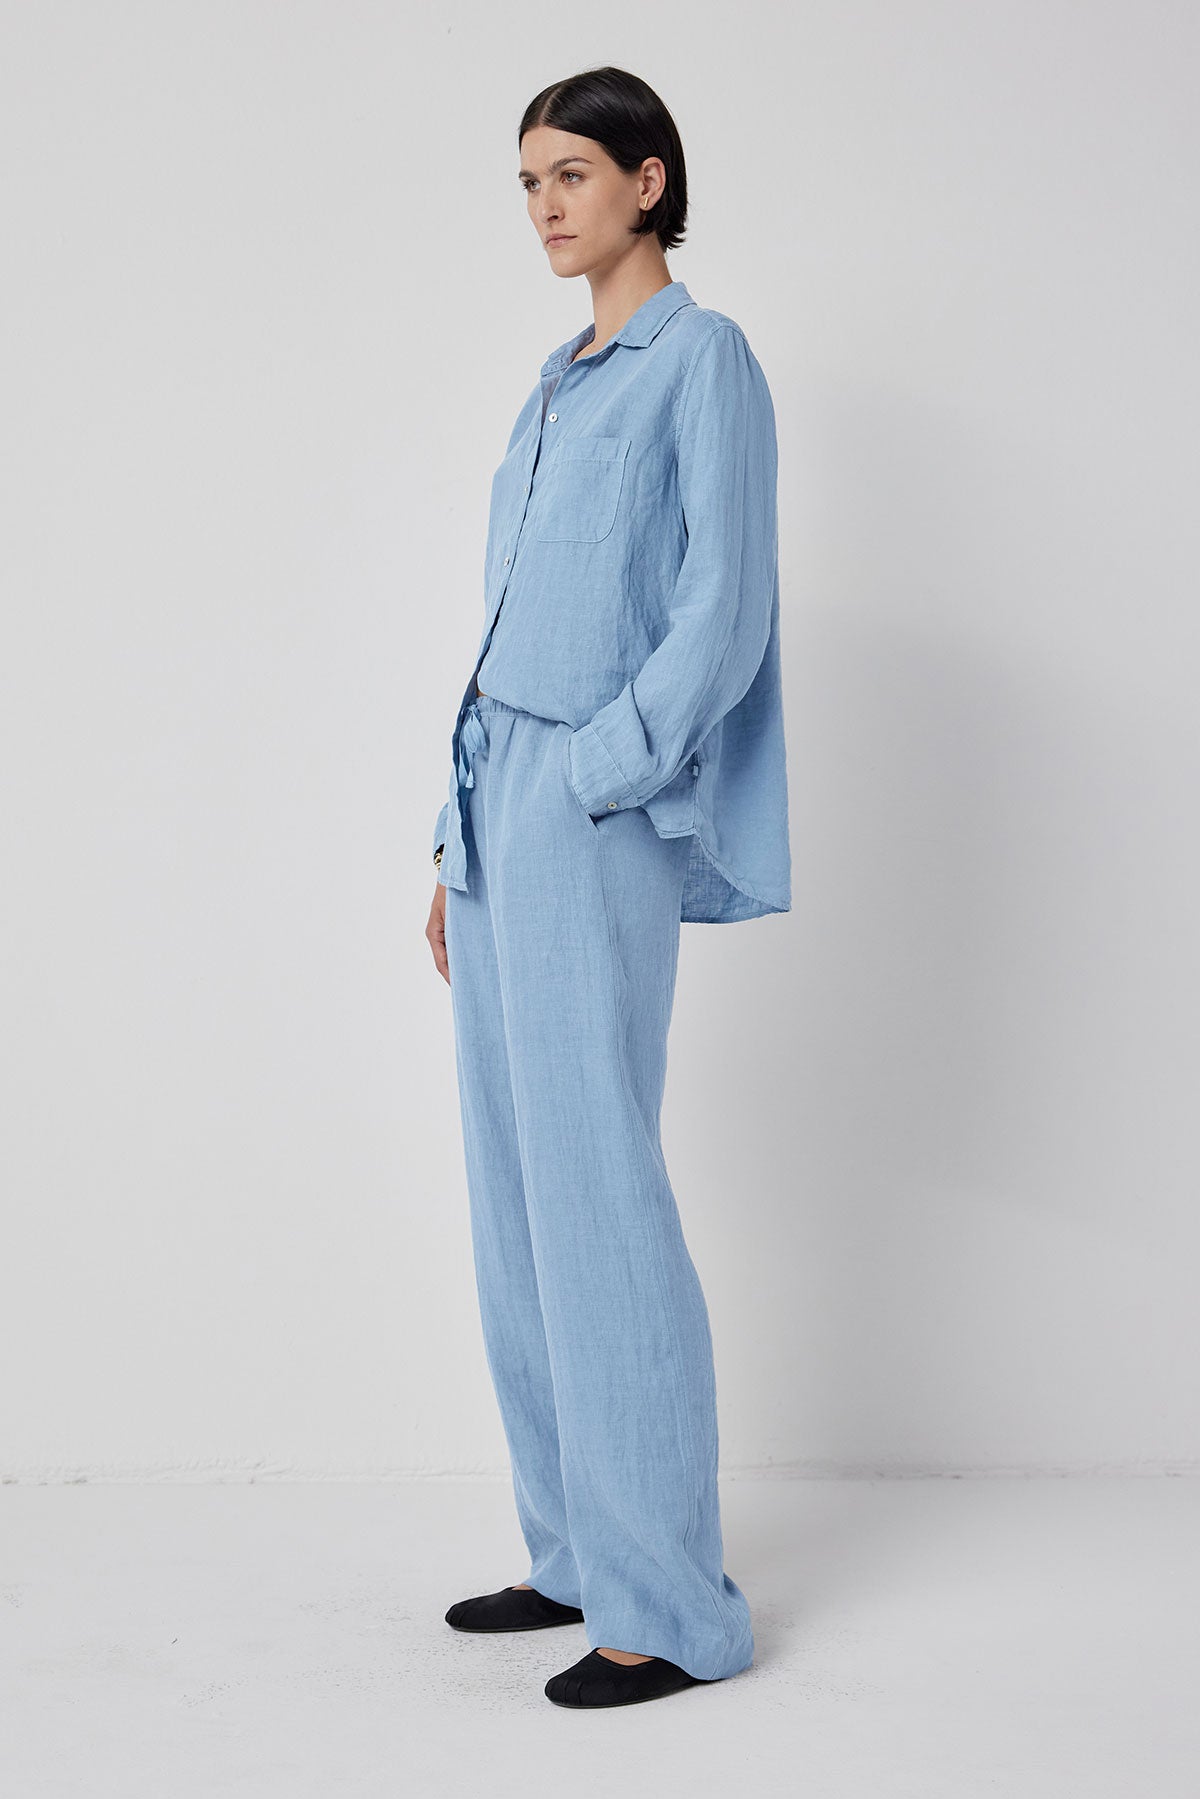   A woman standing and posing in a light blue linen shirt and matching PICO PANT trousers with an elastic waist drawstring against a white background by Velvet by Jenny Graham. 